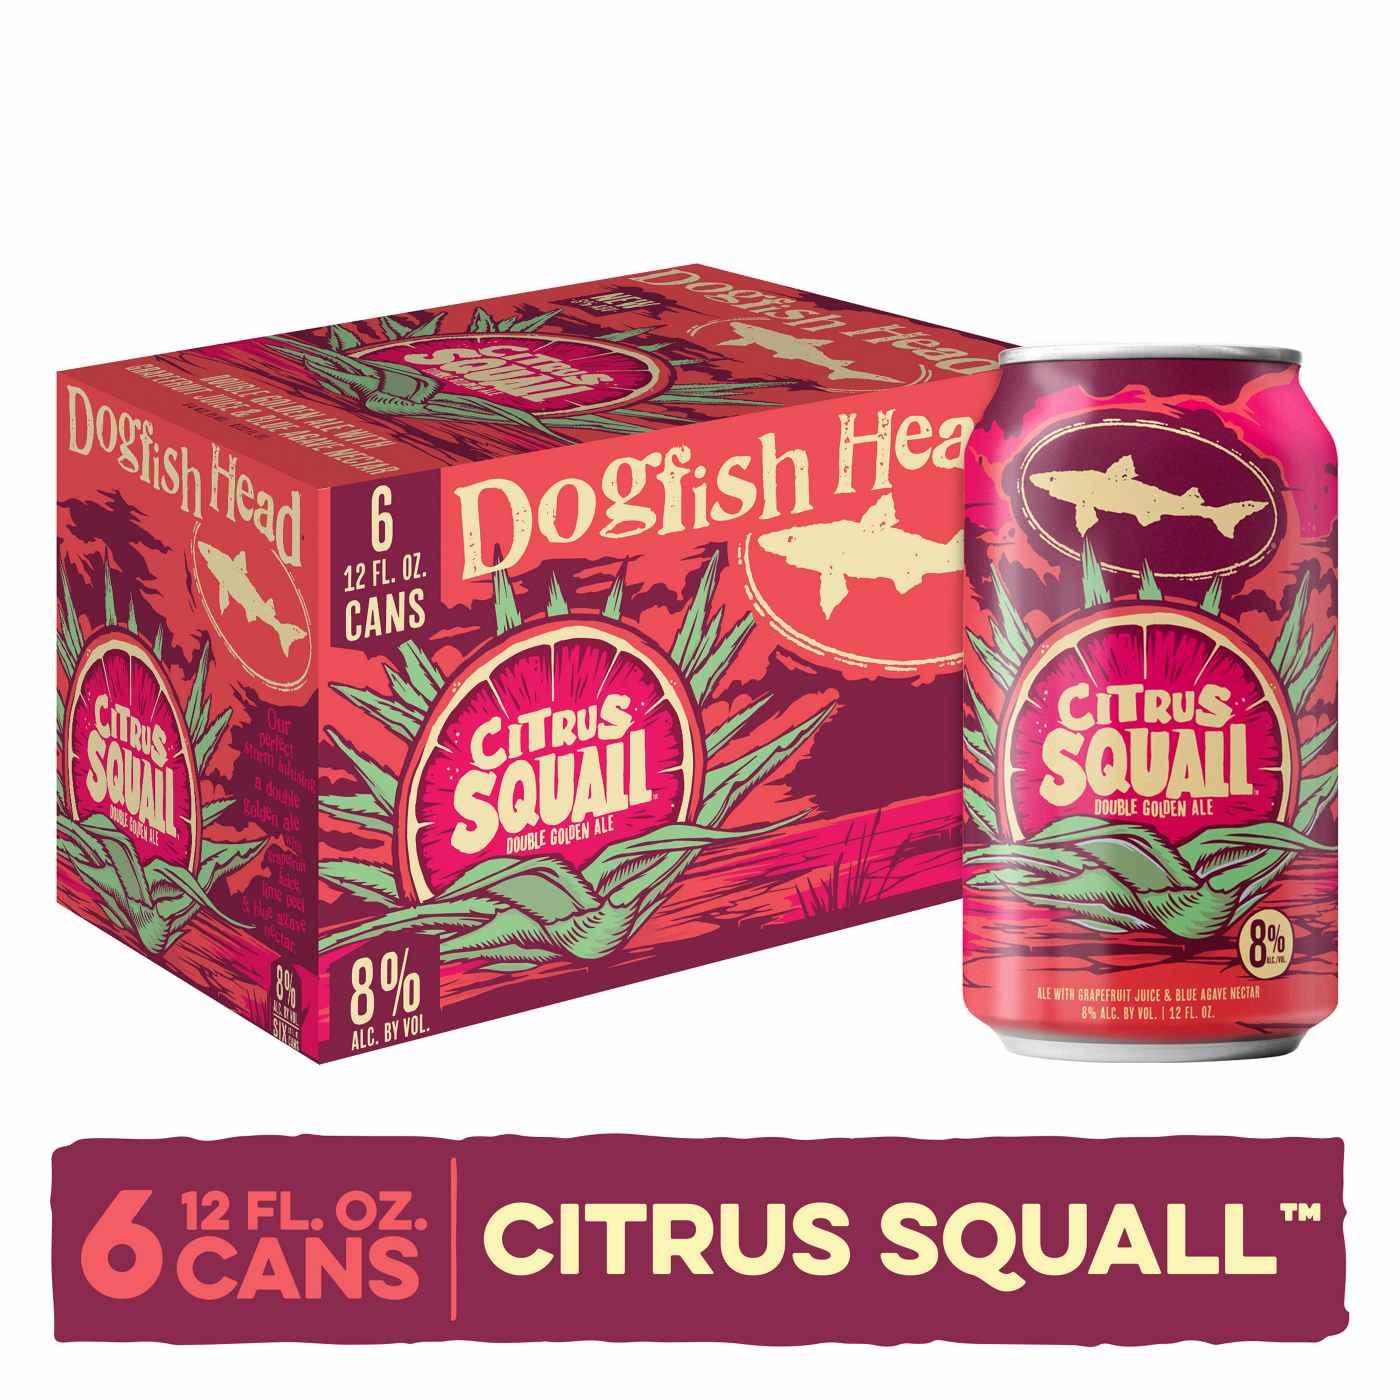 Dogfish Head Citrus Squall Double Golden Ale Beer 6 pk Cans; image 2 of 2